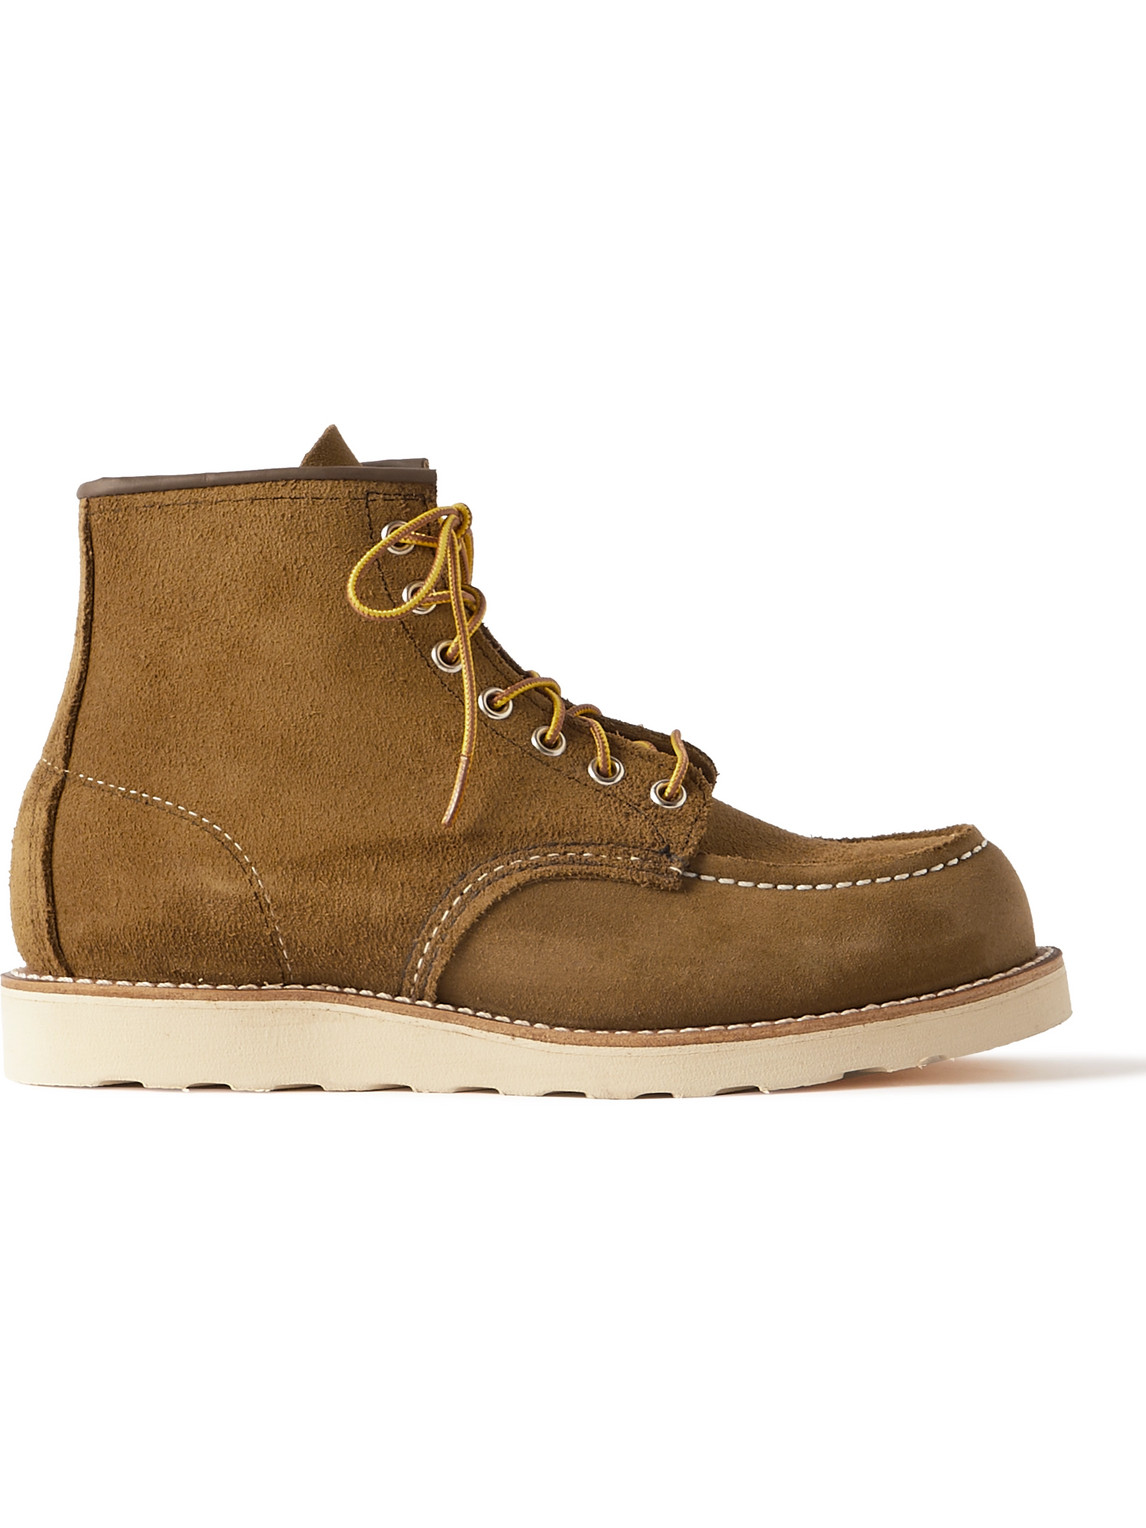 RED WING SHOES 6-INCH HAWTHORNE SUEDE BOOTS